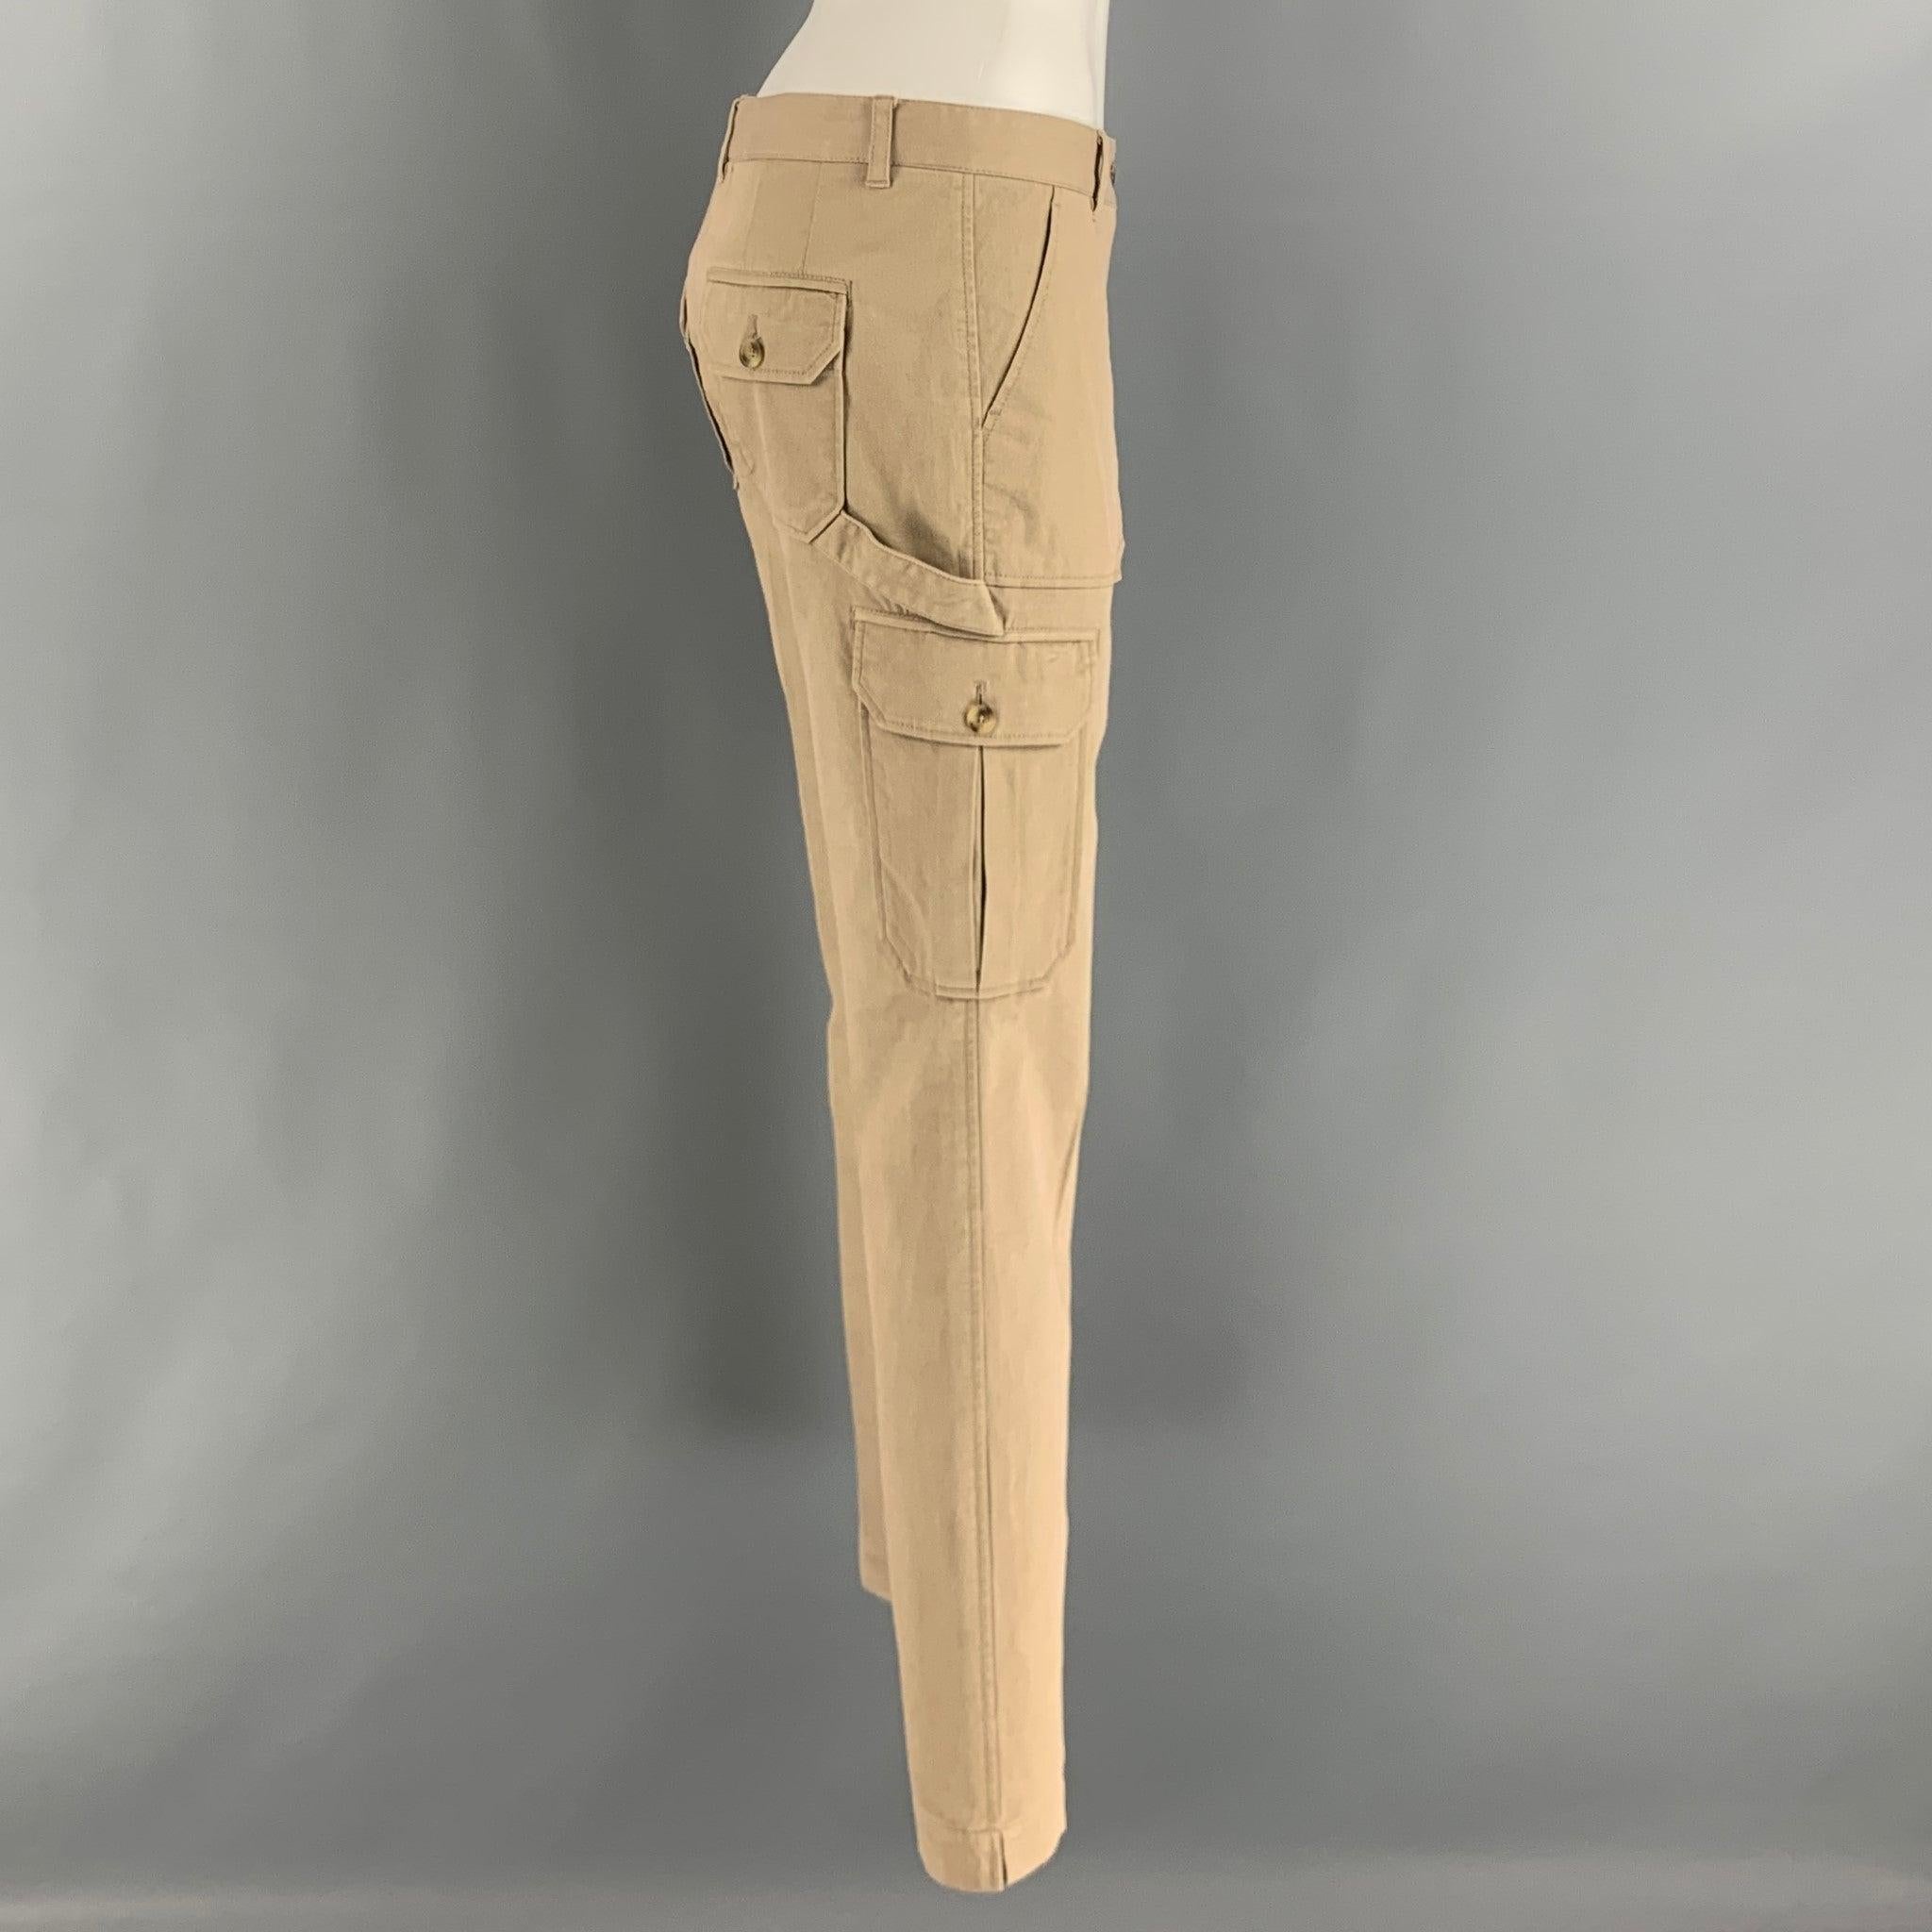 DOLCE & GABBANA pants comes in a khaki cotton and elastane twill material featuring a cargo style, low waist, and a side zipper closure. Made in
Italy.Excellent Pre-Owned Condition.
 

Marked:   40 

Measurements: 
  Waist: 31 inches Rise: 7.5